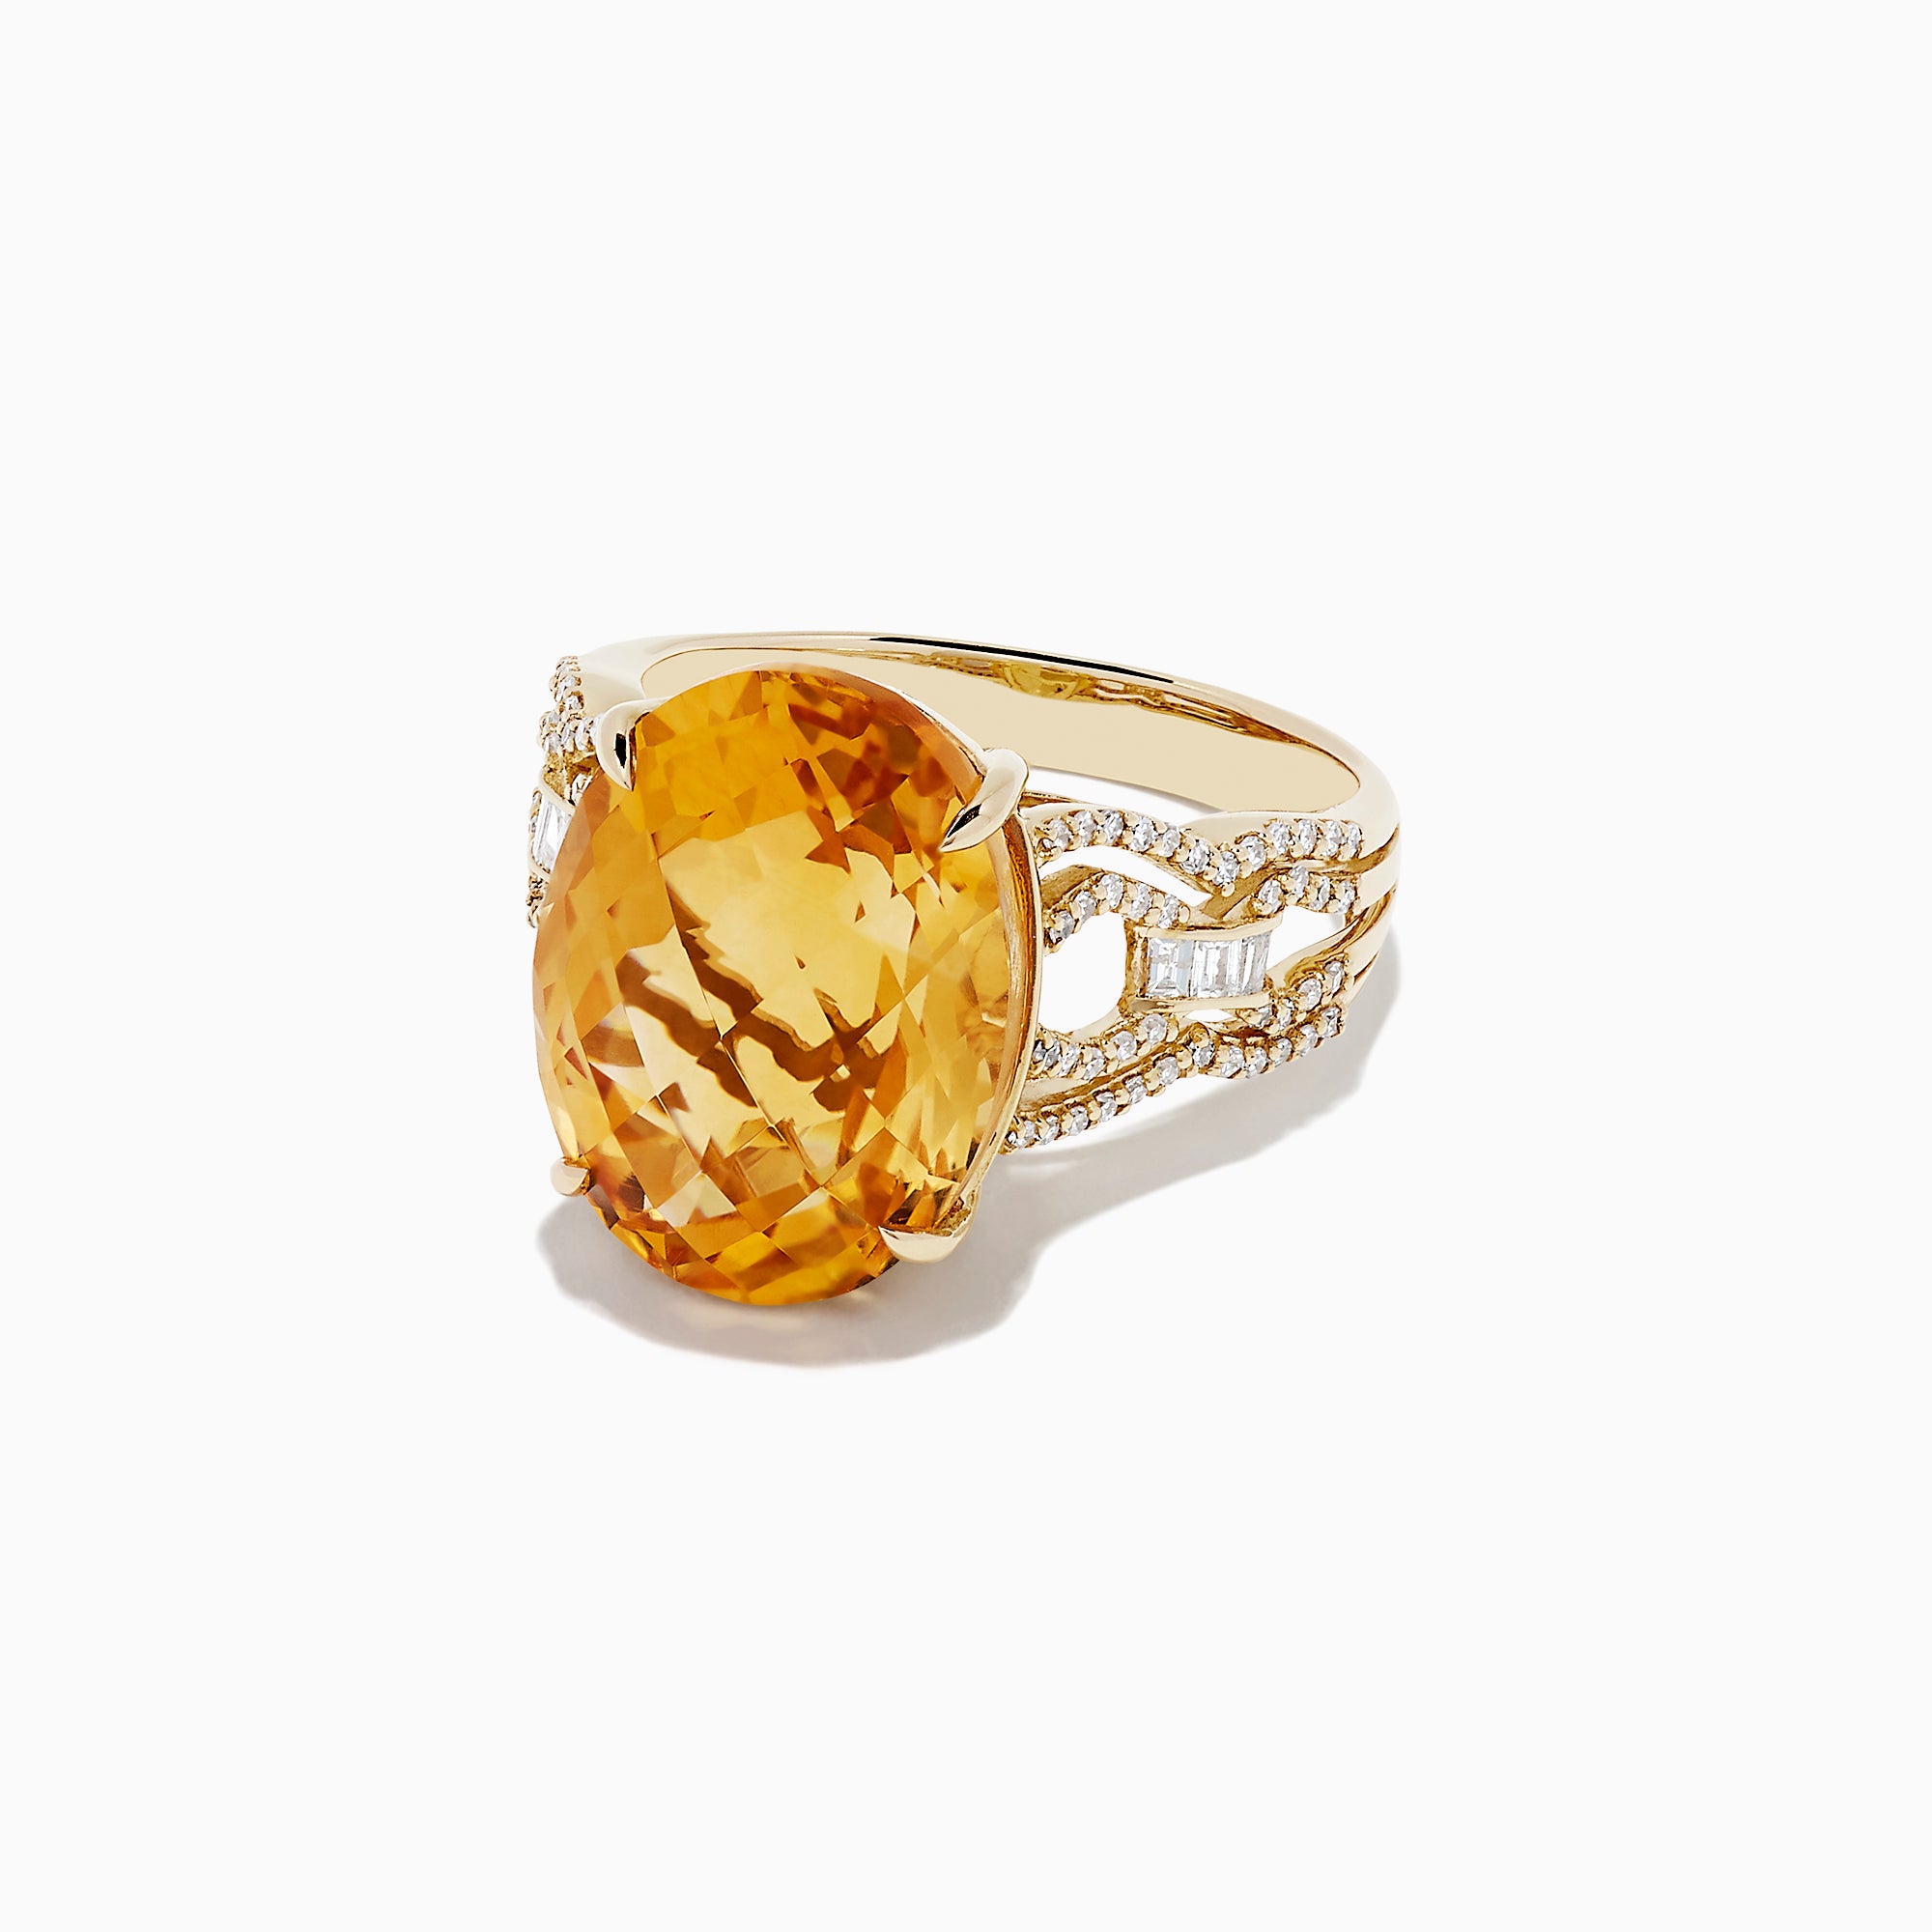 Effy Sunset 14K Yellow Gold Citrine and Diamond Cocktail Ring, 9.72 TCW